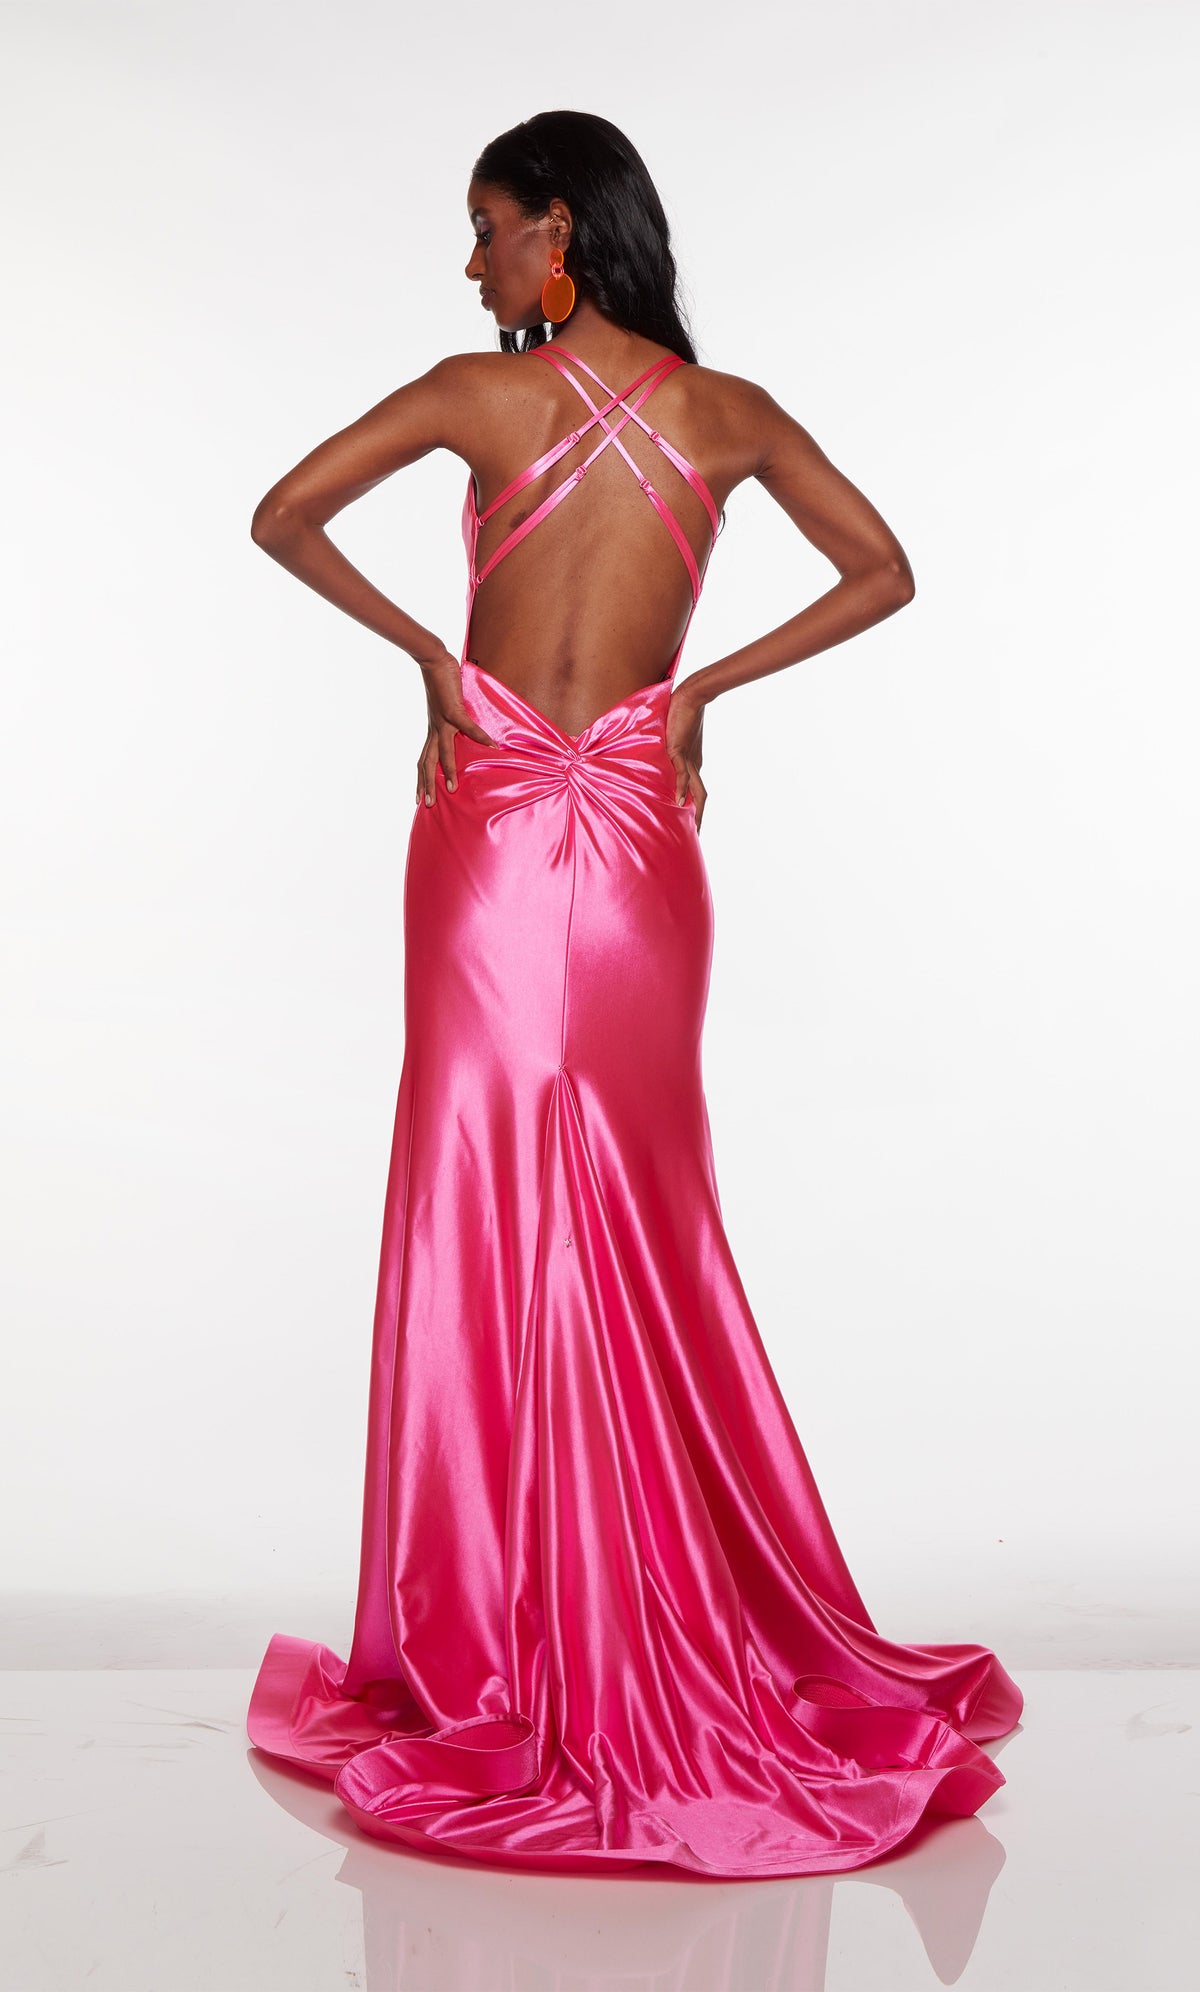 Pink satin gown with a crisscross back and long train.